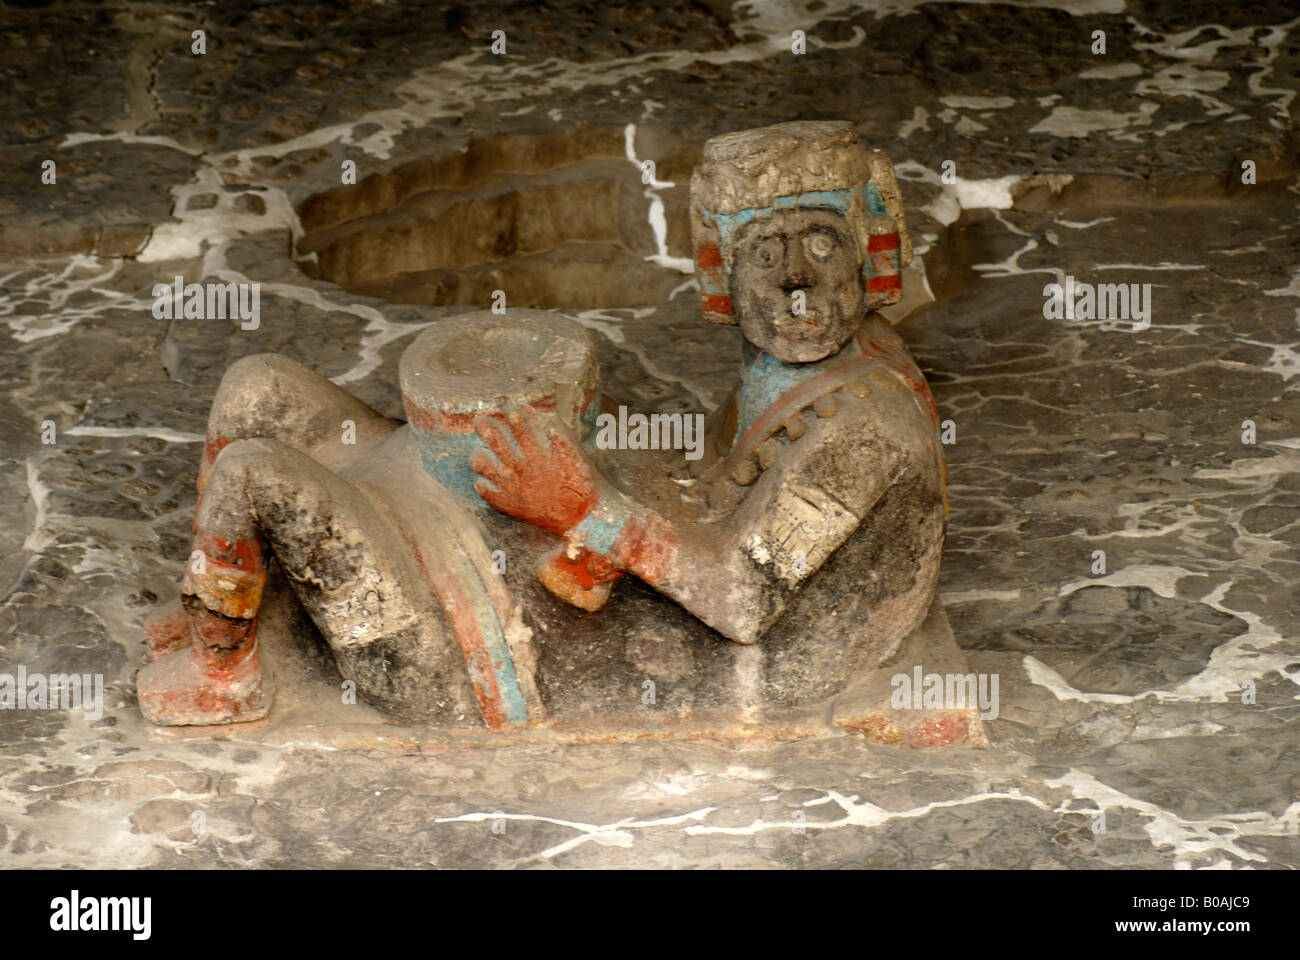 Polychrome Chacmool sculpture at the ruins of the Templo Mayor or Great Temple of Tenochtitlan, Mexico City Stock Photo